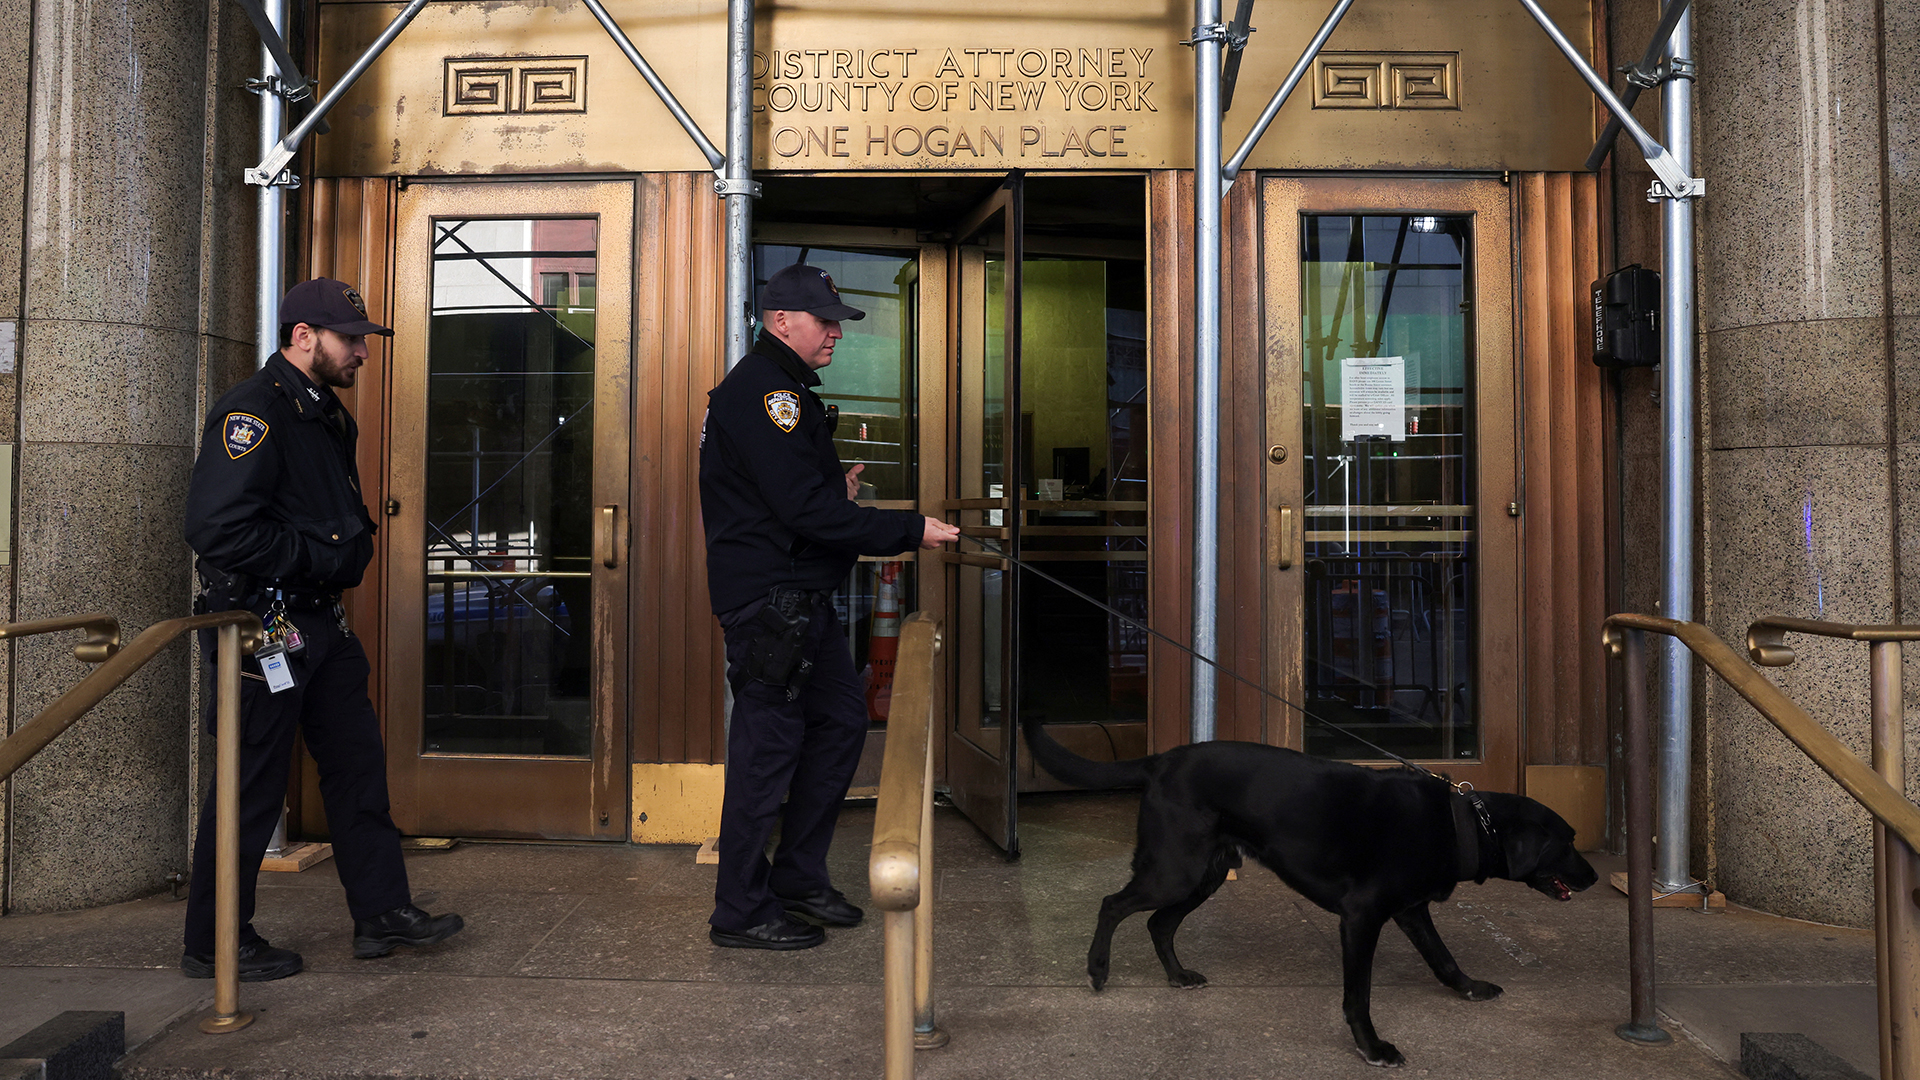 Officers from the New York City Police Department Canine Unit search around the District Attorney's Office in New York City on March 29.